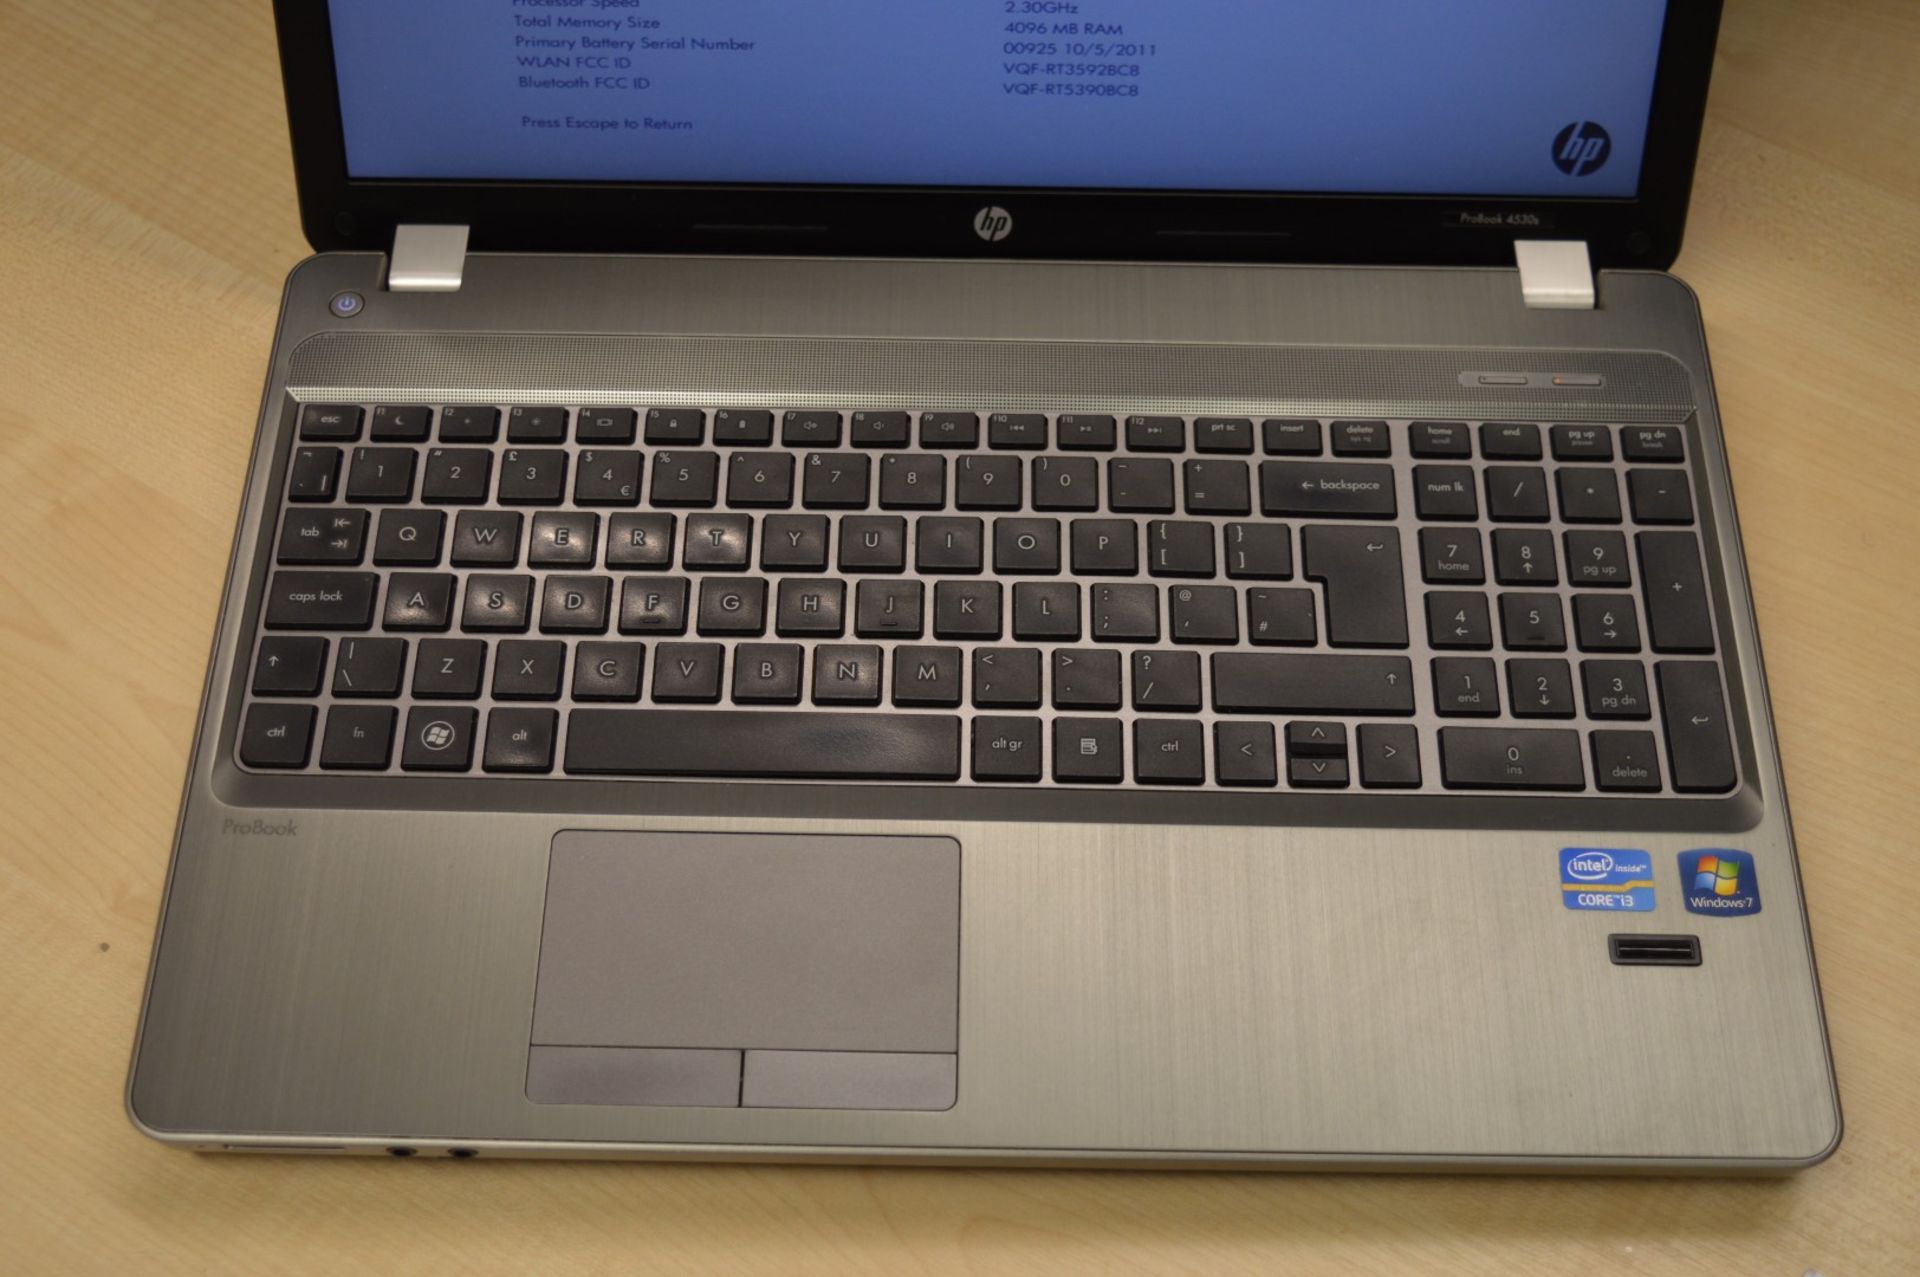 1 x HP Probook 4530s Laptop Computer - 15.6 Inch Screen Size - Features Intel Core i3-2350M Dual - Image 11 of 14